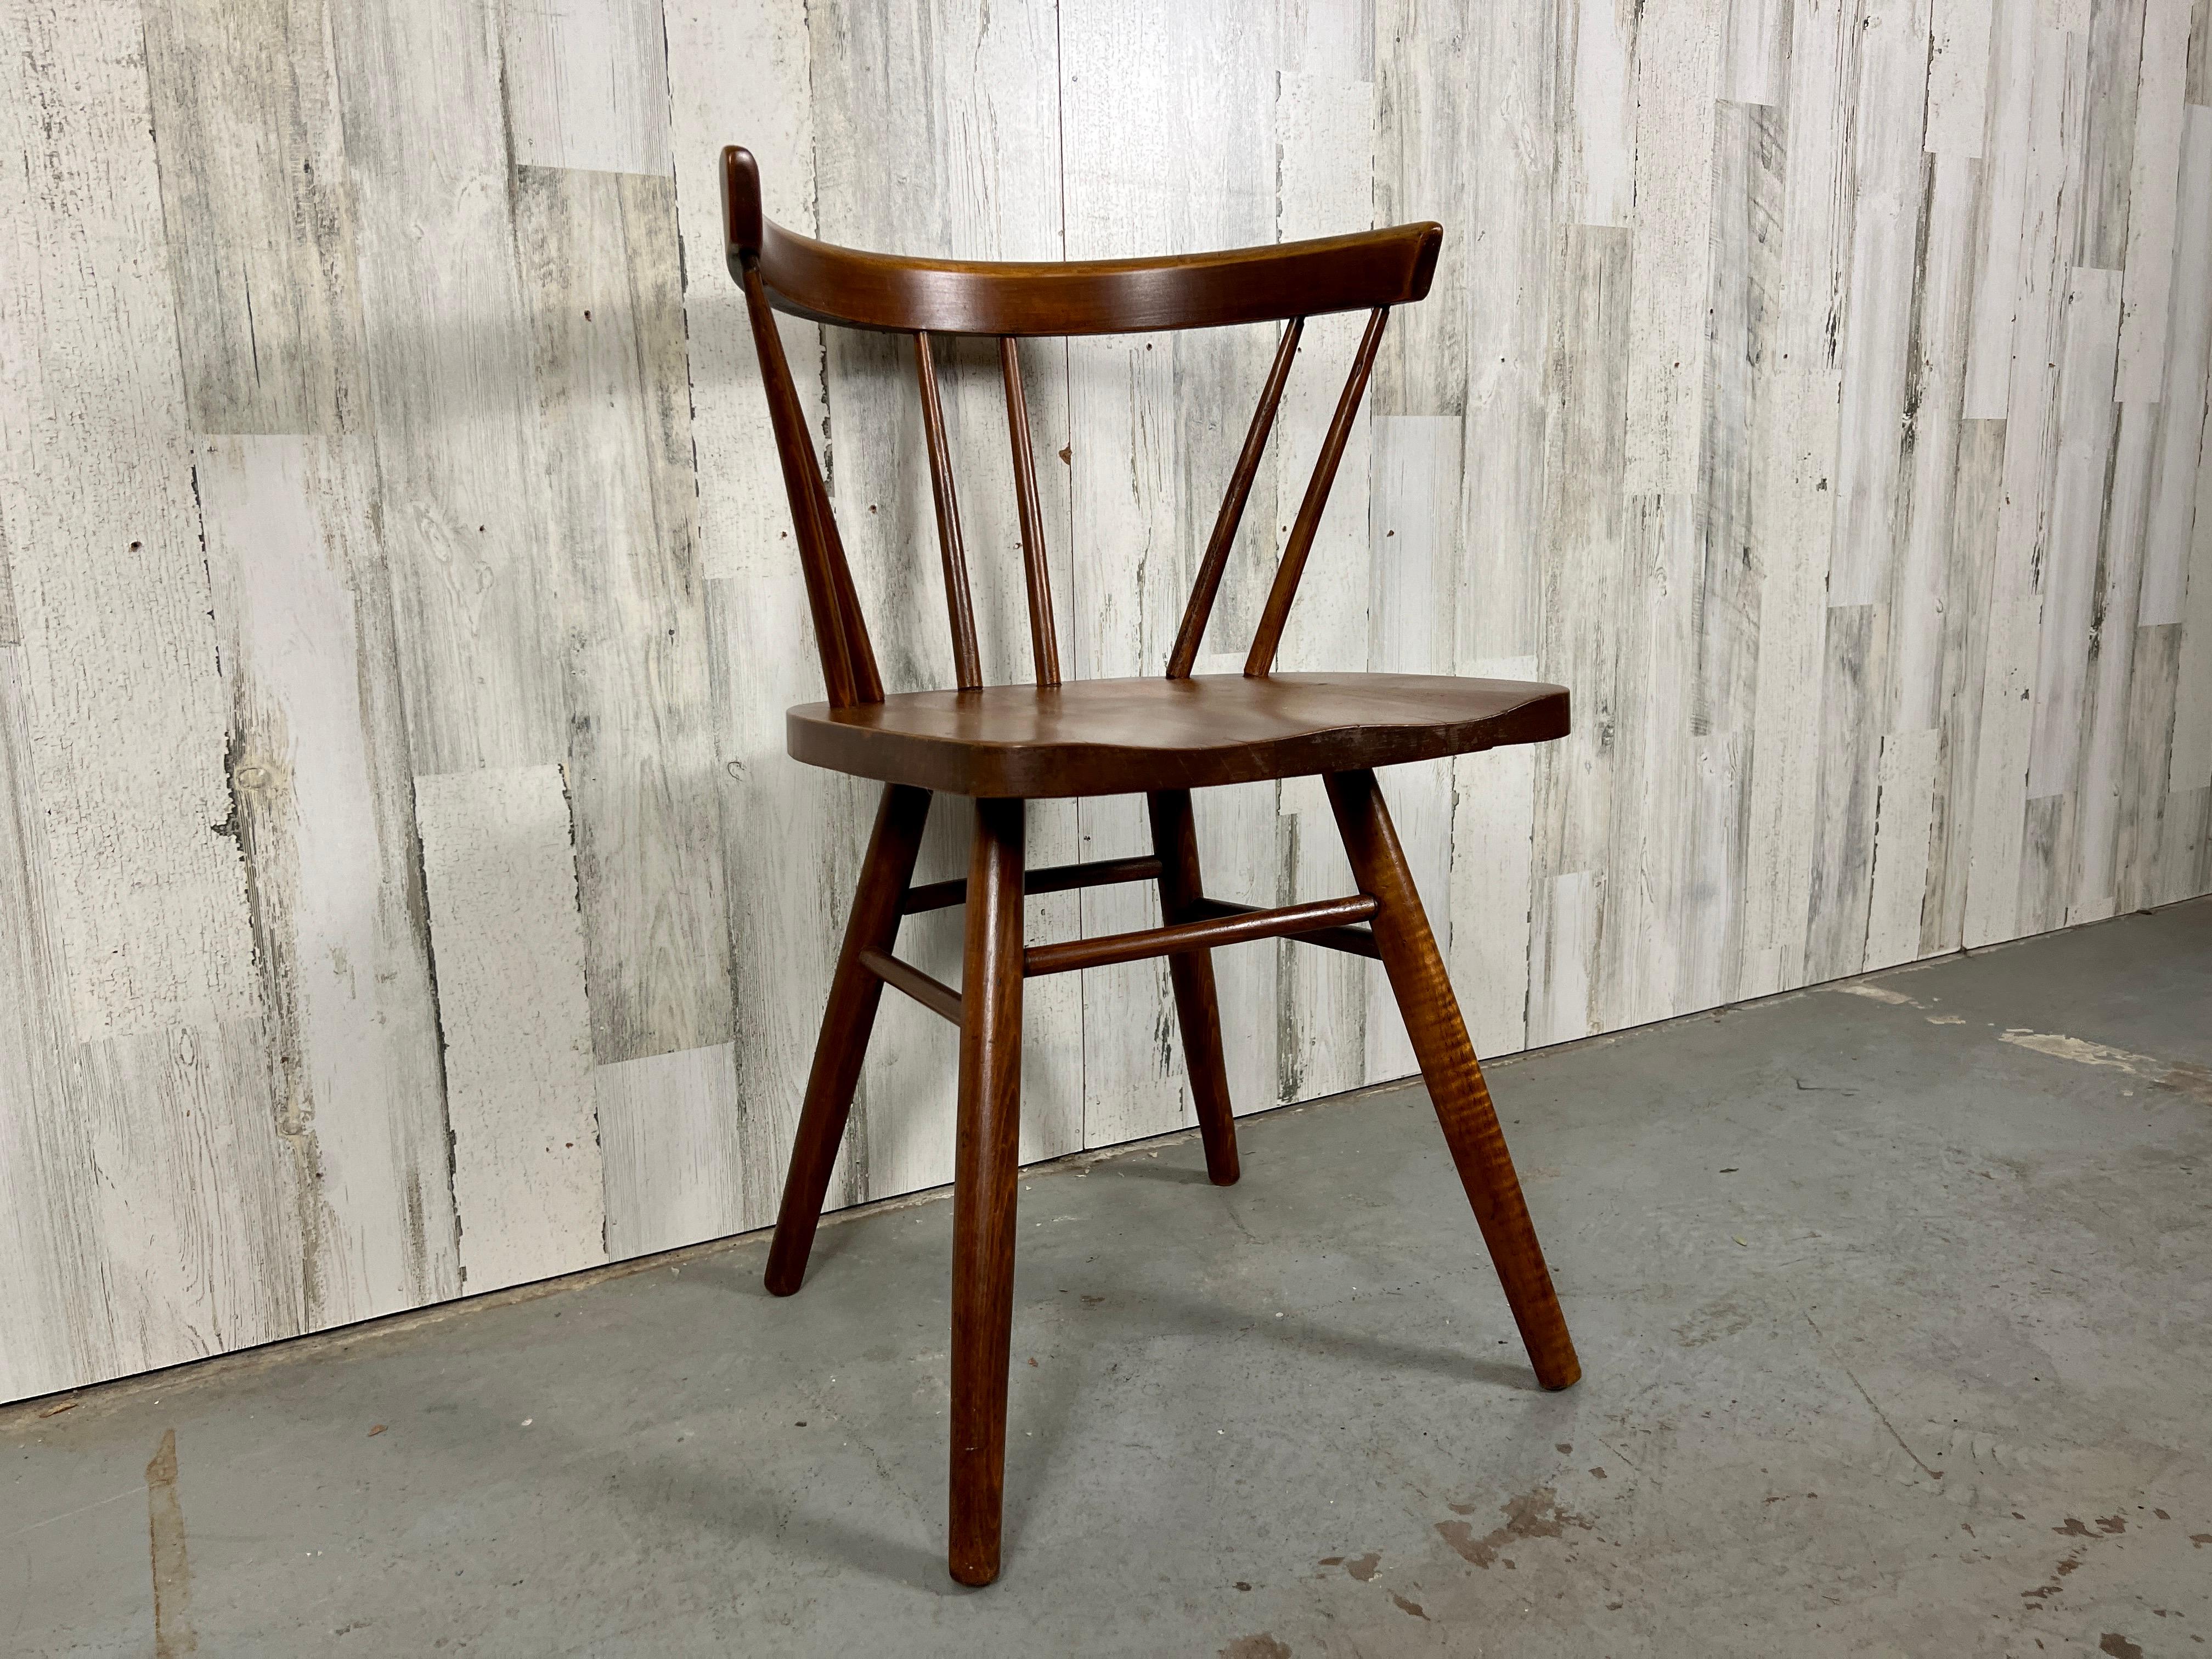 20th Century Mid-Century Spindle Chair For Sale